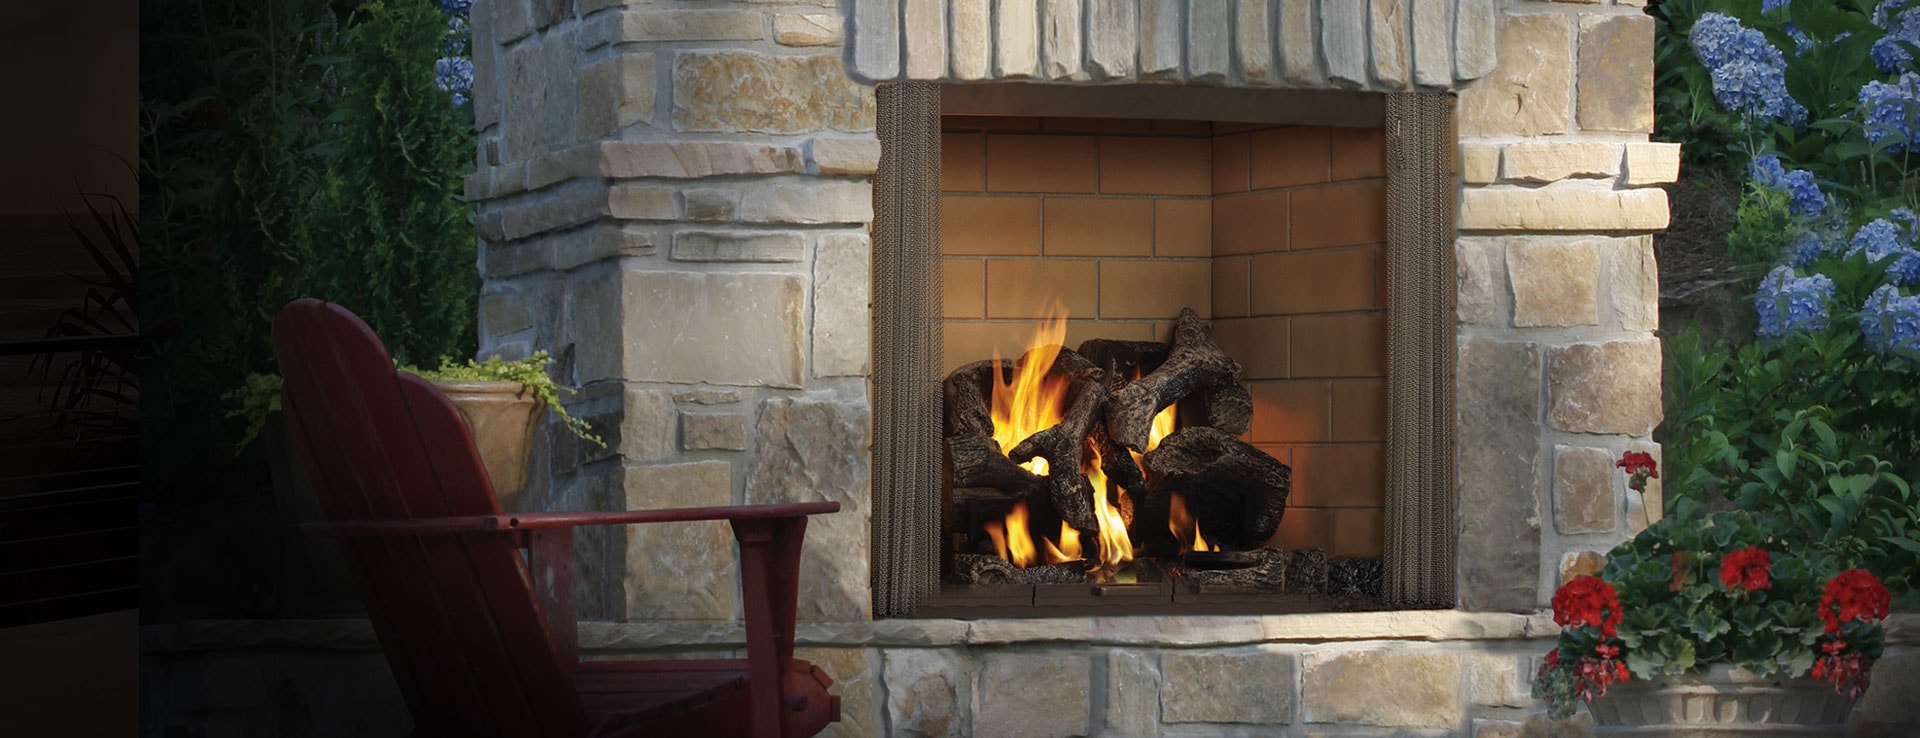 How to Remove Fireplace Glass Doors New Castlewood Outdoor Wood Fireplace